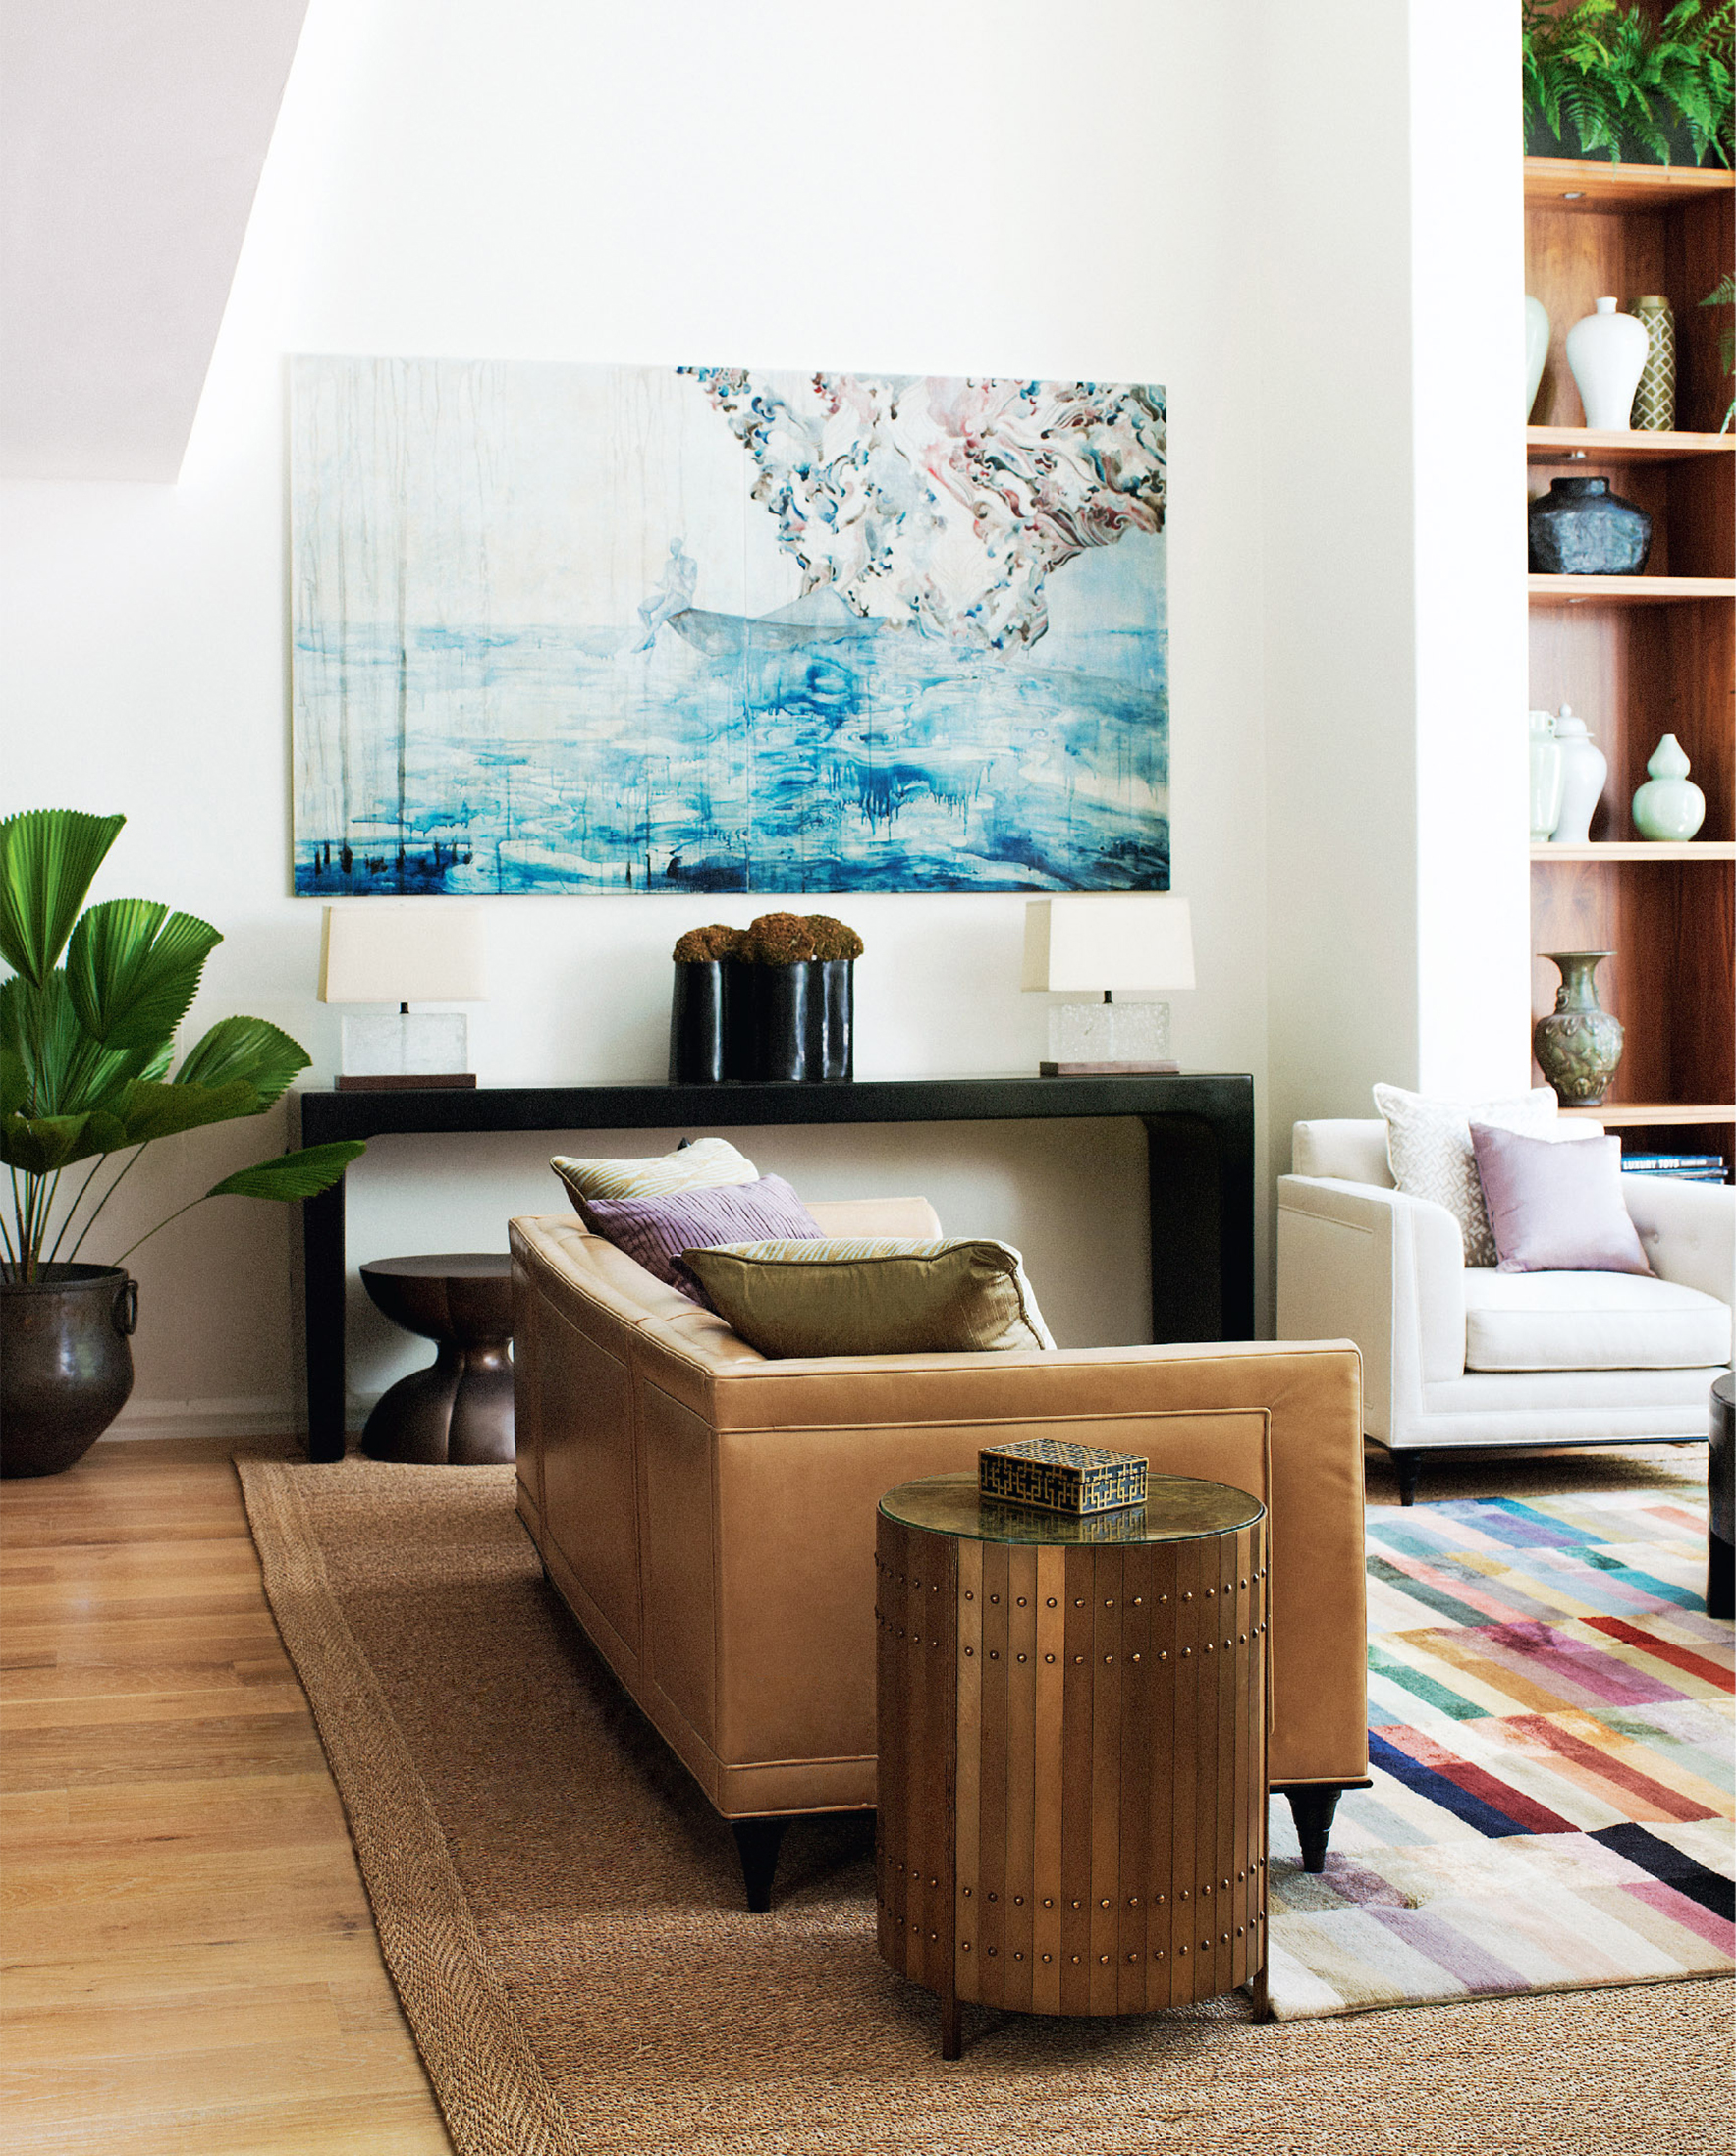 Formal sitting area with artwork by Belinda Fox, console and leather sofa, by Sydney interior designers, Brendan Wong Design